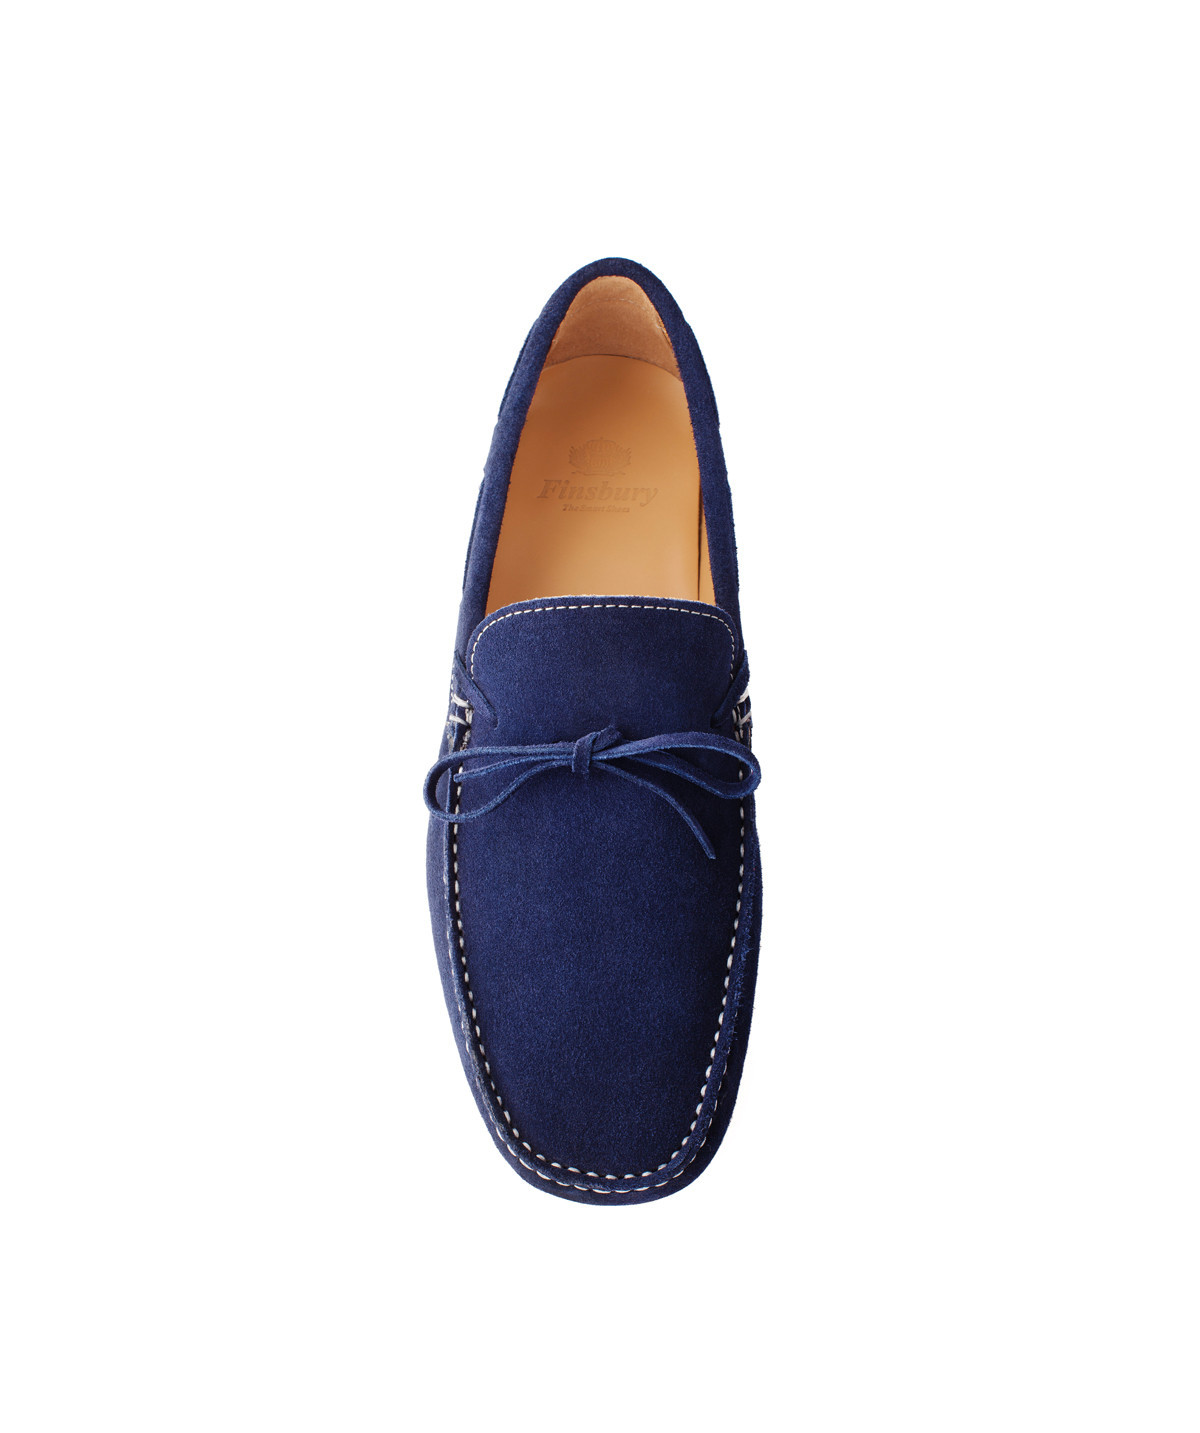 Loafers KEY WEST Suede Navy